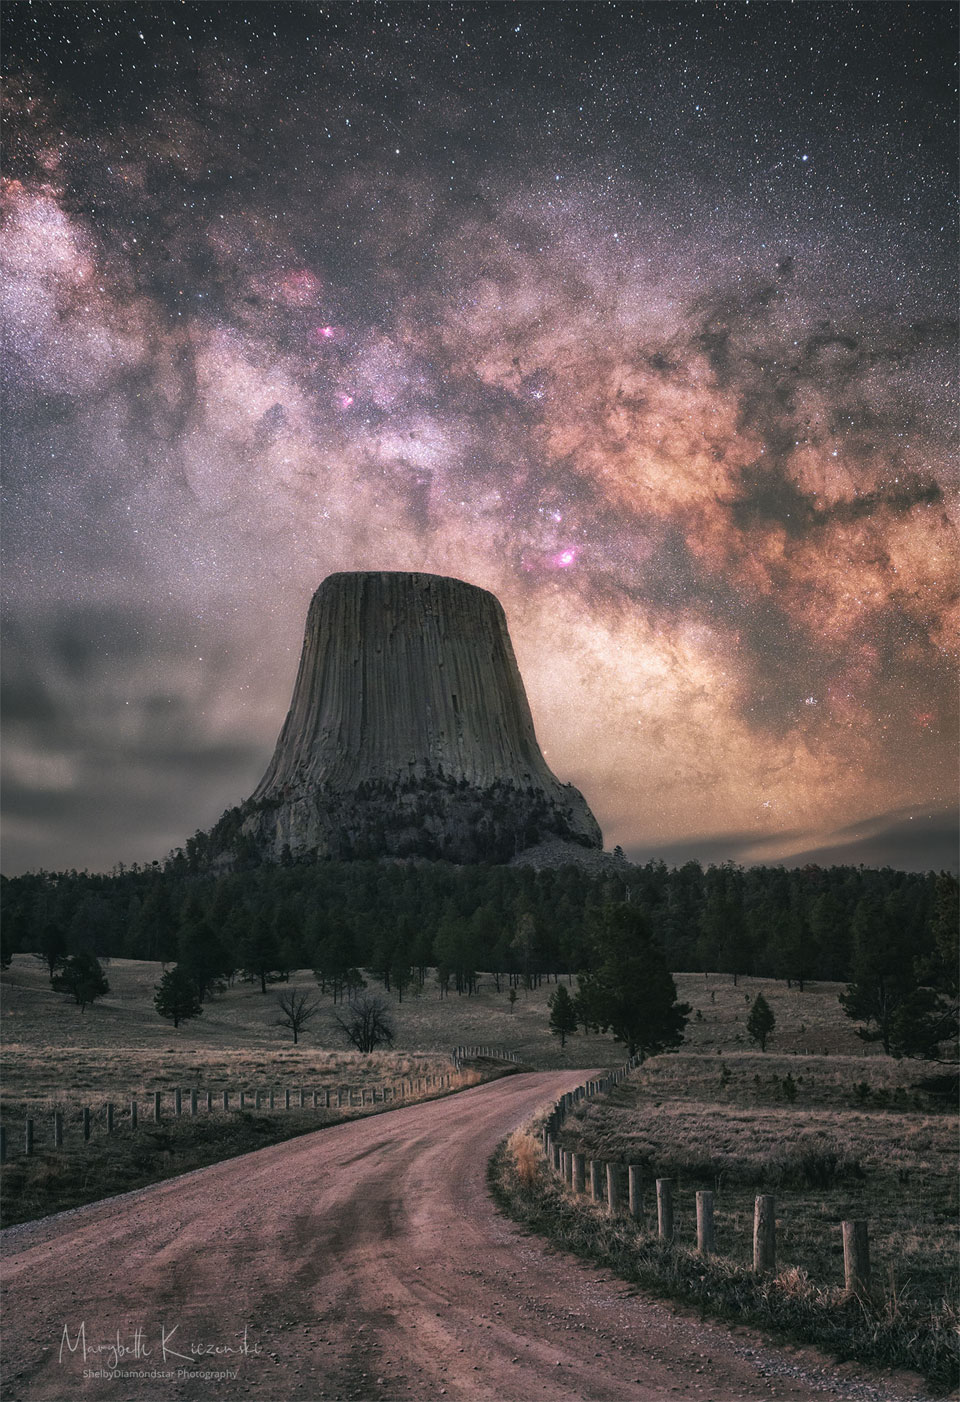 The featured image shows Devils Tower in Wyoming, USA
under a brilliant sky that includes a deep image of the 
central bank of our Milky Way galaxy.
Please see the explanation for more detailed information.